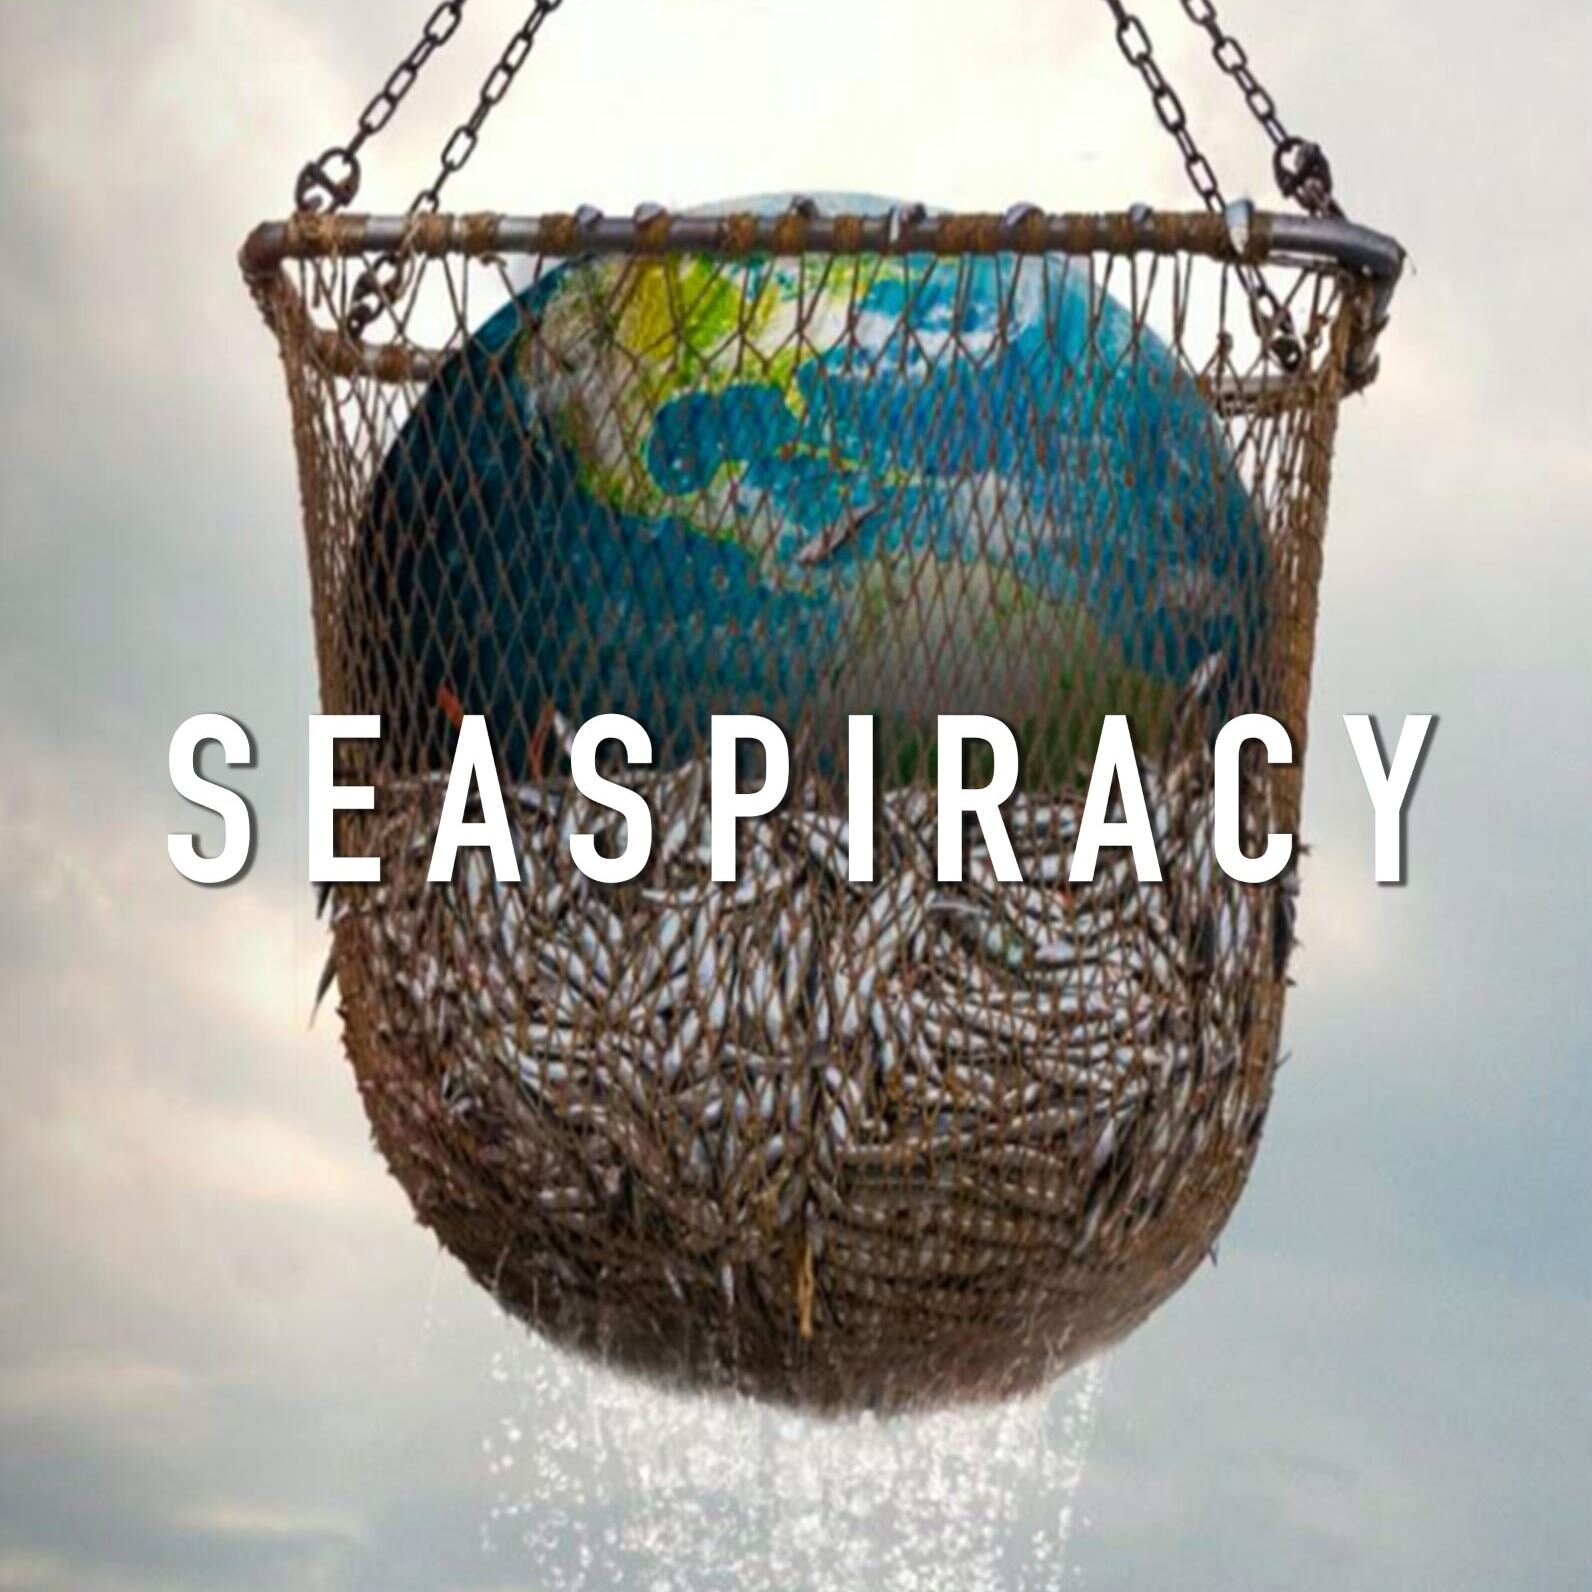 Film  poster for Seaspiracy showing fishing net containing fish and the earth on top